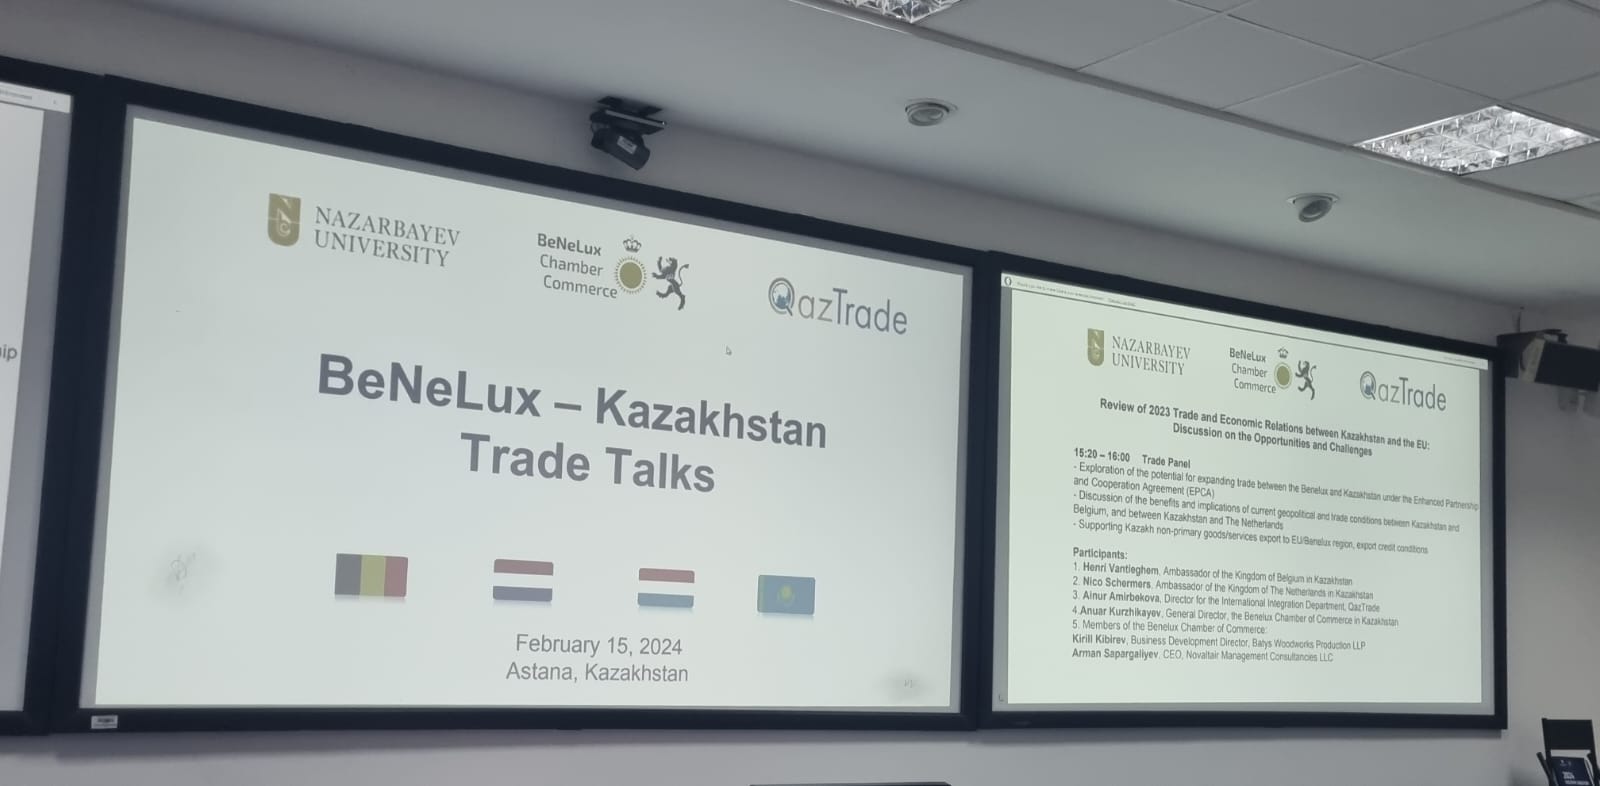 Kazakhstan and the Benelux countries are interested in expanding their trade and investment partnership